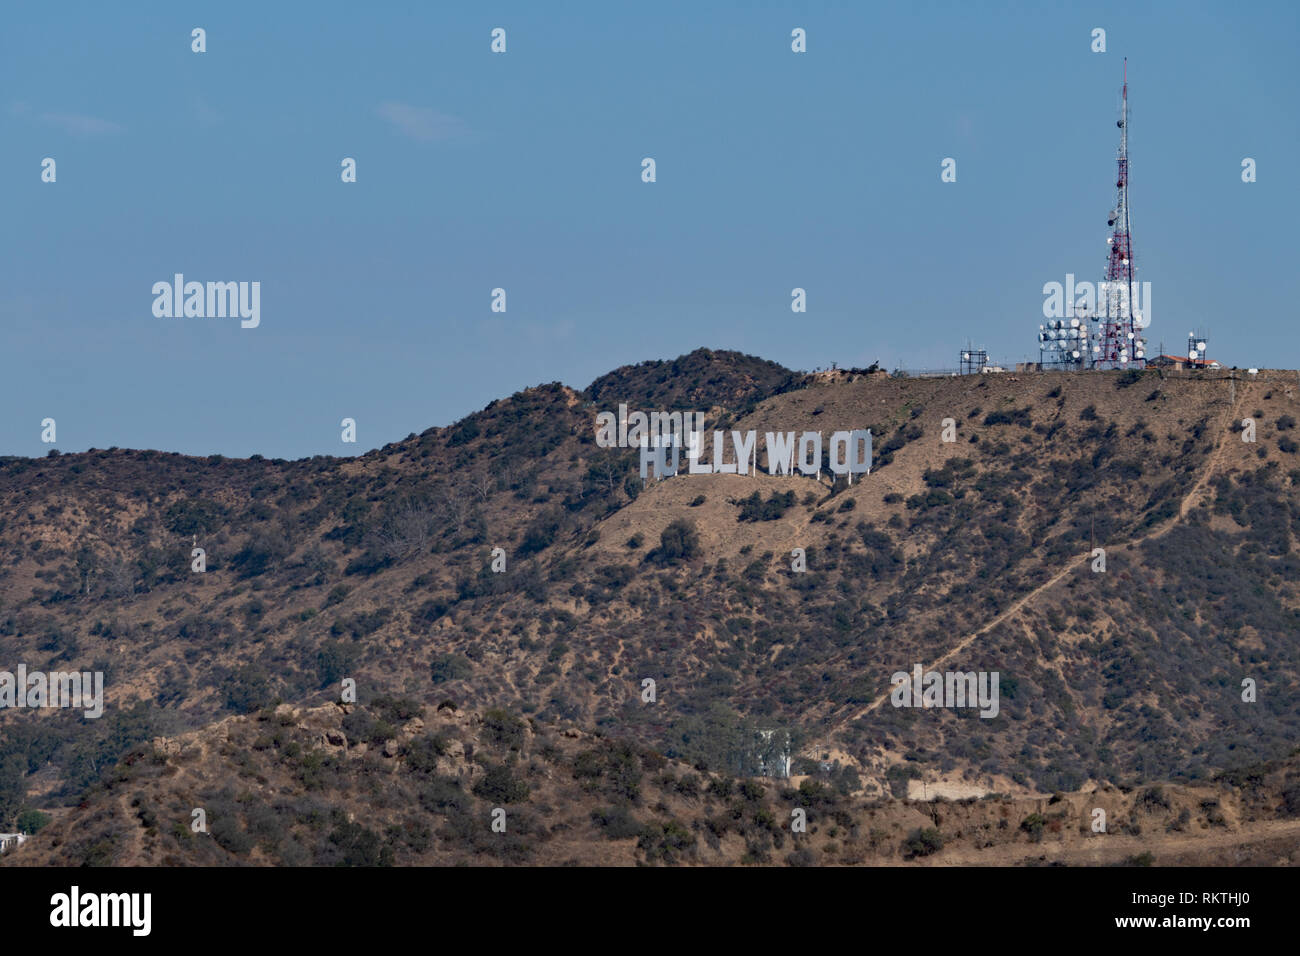 Hollywood sign, tourist spot on the hills around Los Angeles, California, United States of America. Famous view and attraction in the US with televisi Stock Photo